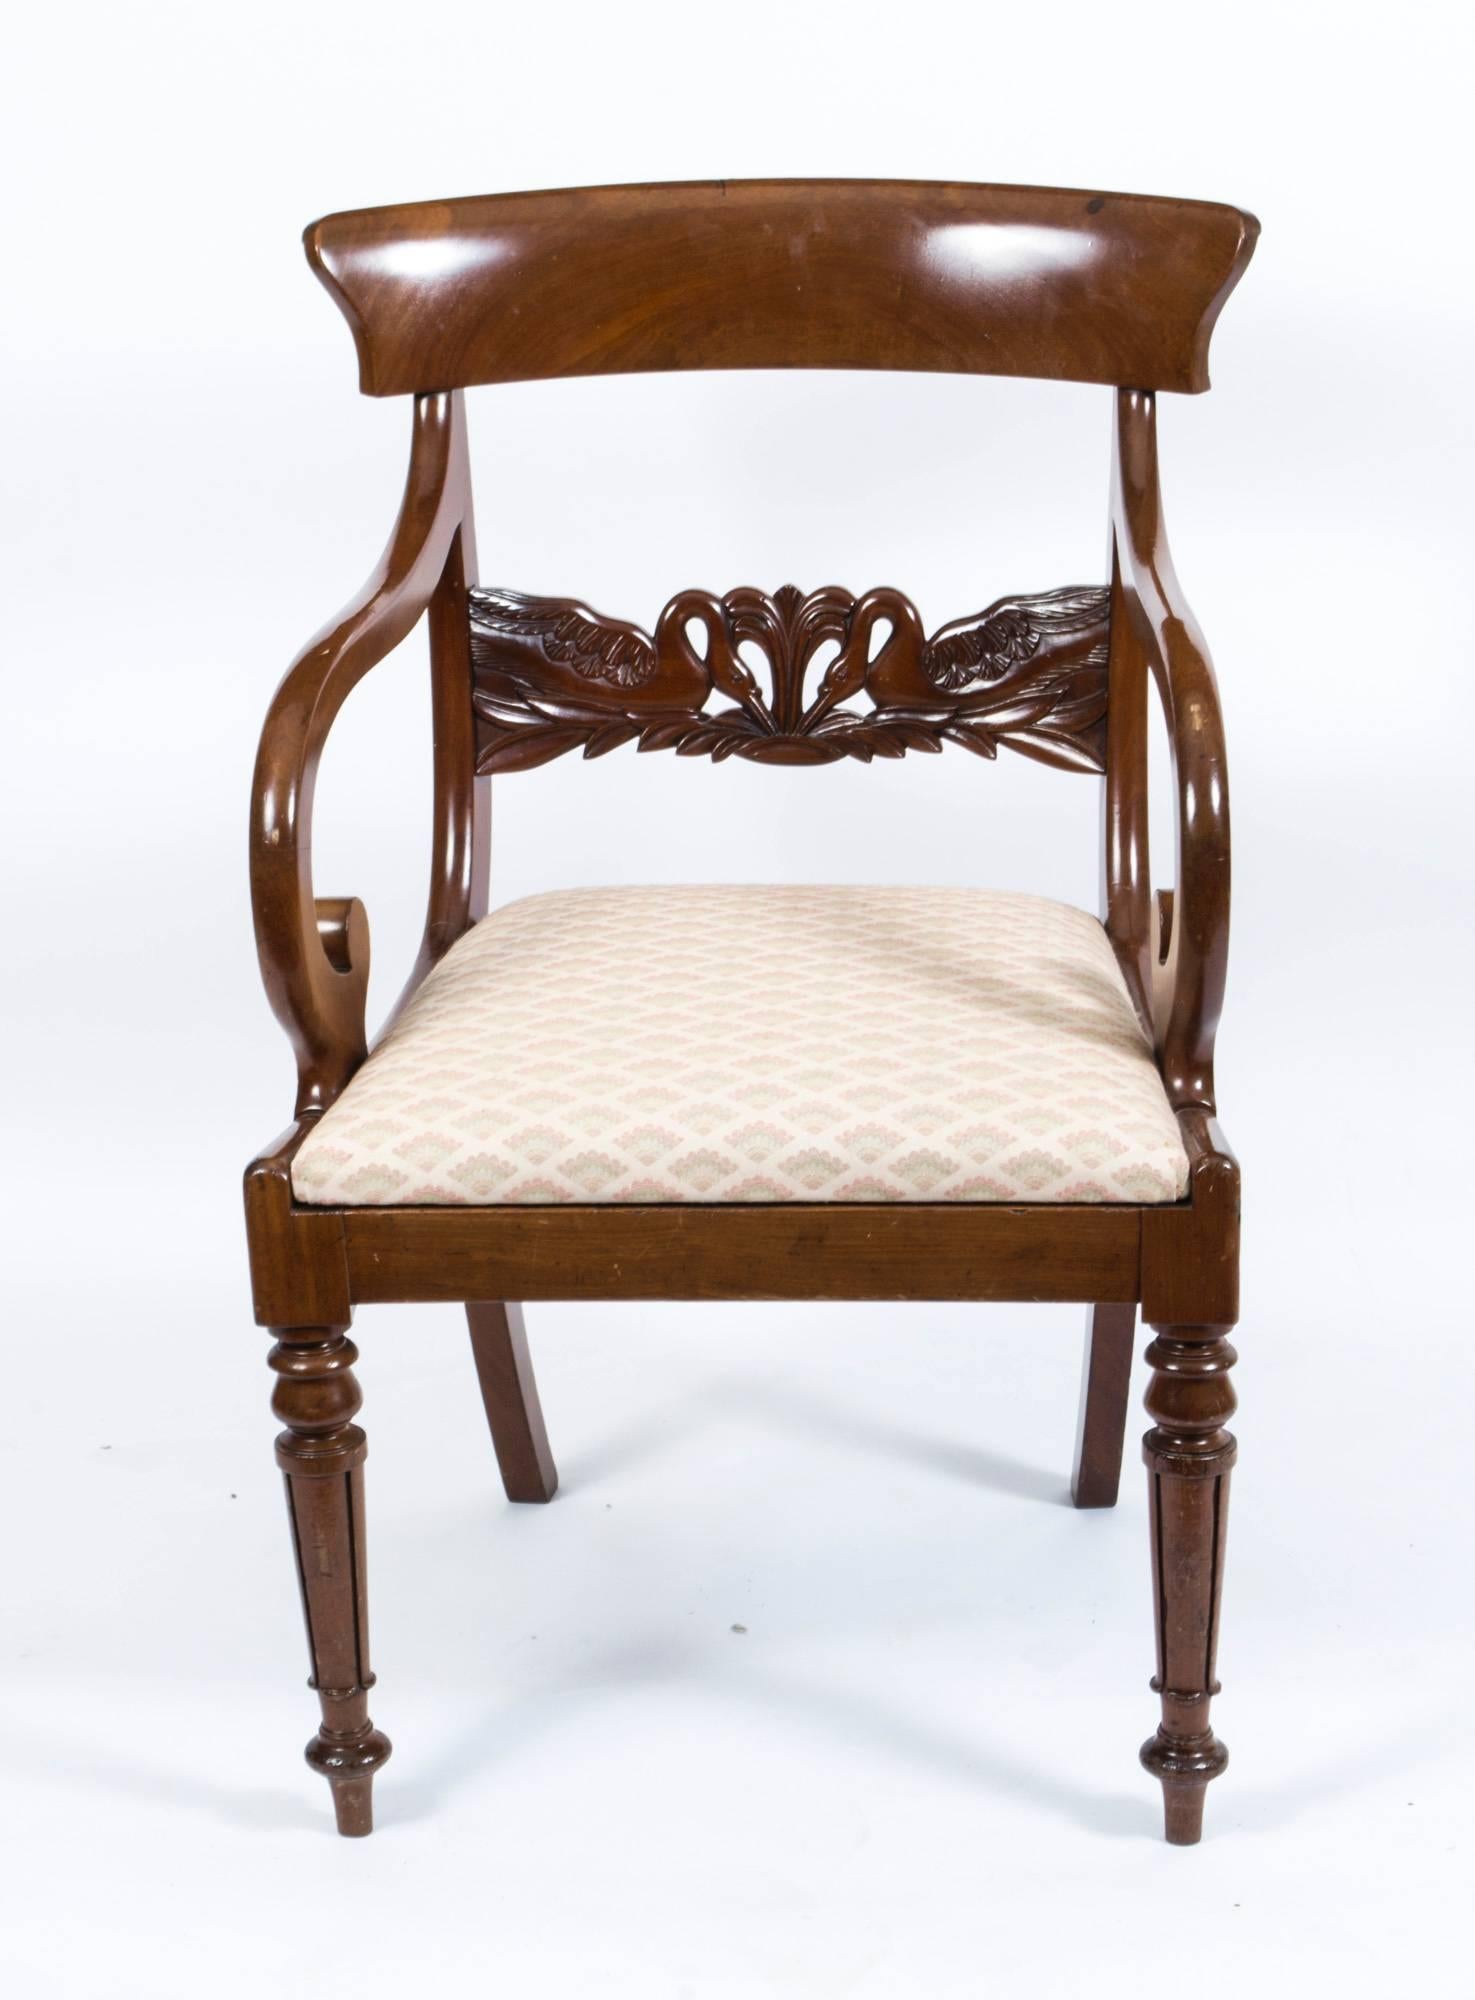 This is an elegant antique Regency mahogany elbow chair, circa 1820 in date.

The pair of downswept arms have scroll terminals and the horizontal rail is beautifully carved with a mirrored pair of swans.

The drop in seat is upholstered in a